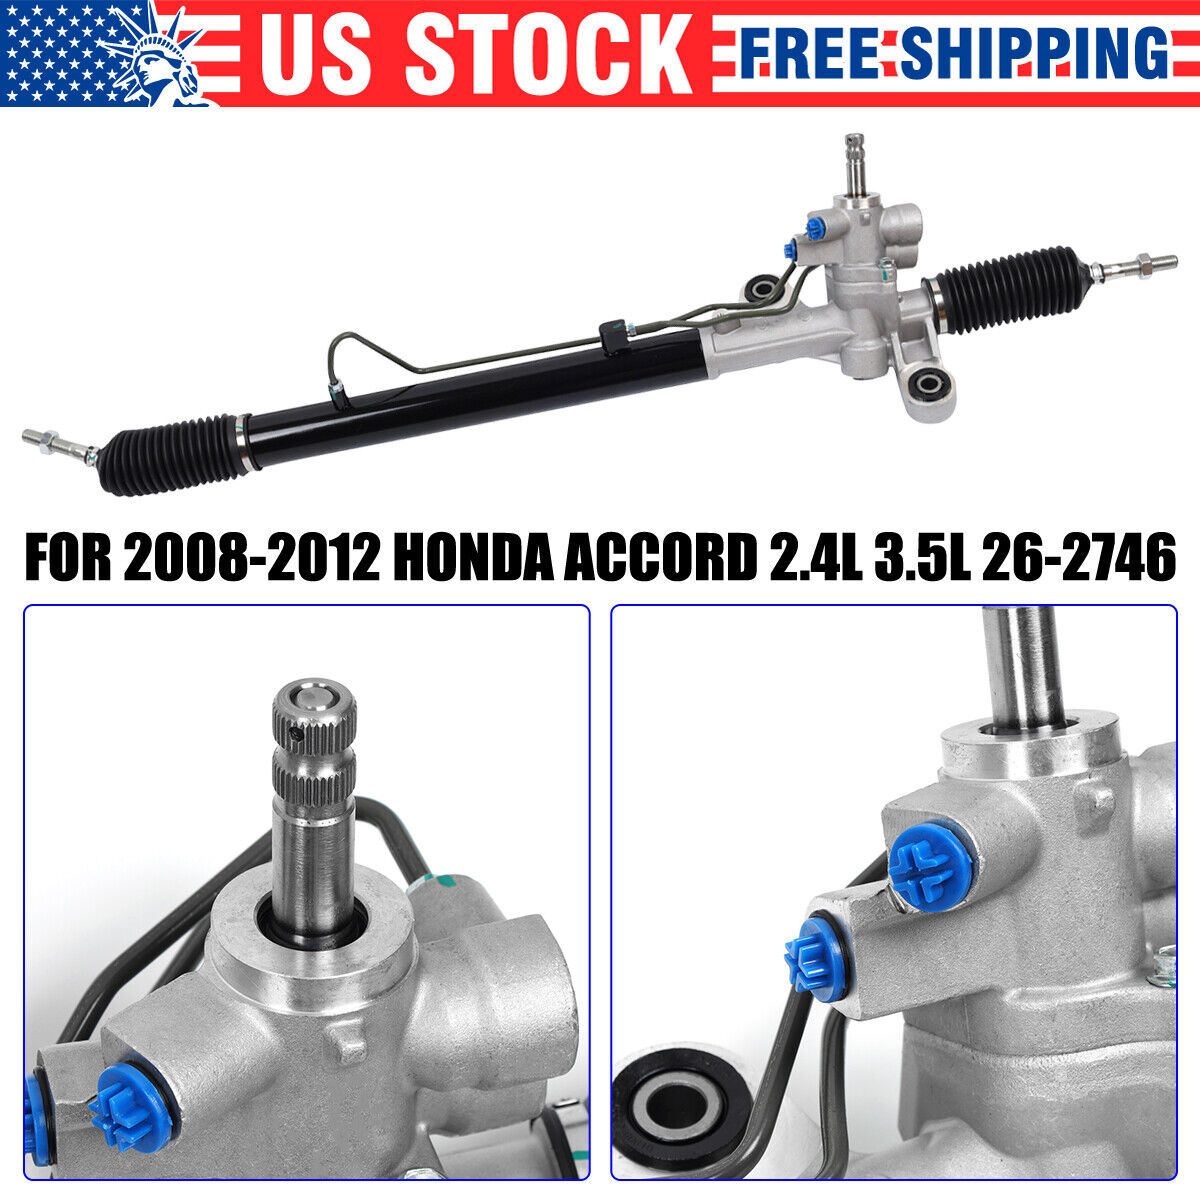 New Power Steering Rack and Pinion Assembly for Honda Accord 2008-2012 2.4L 3.5L